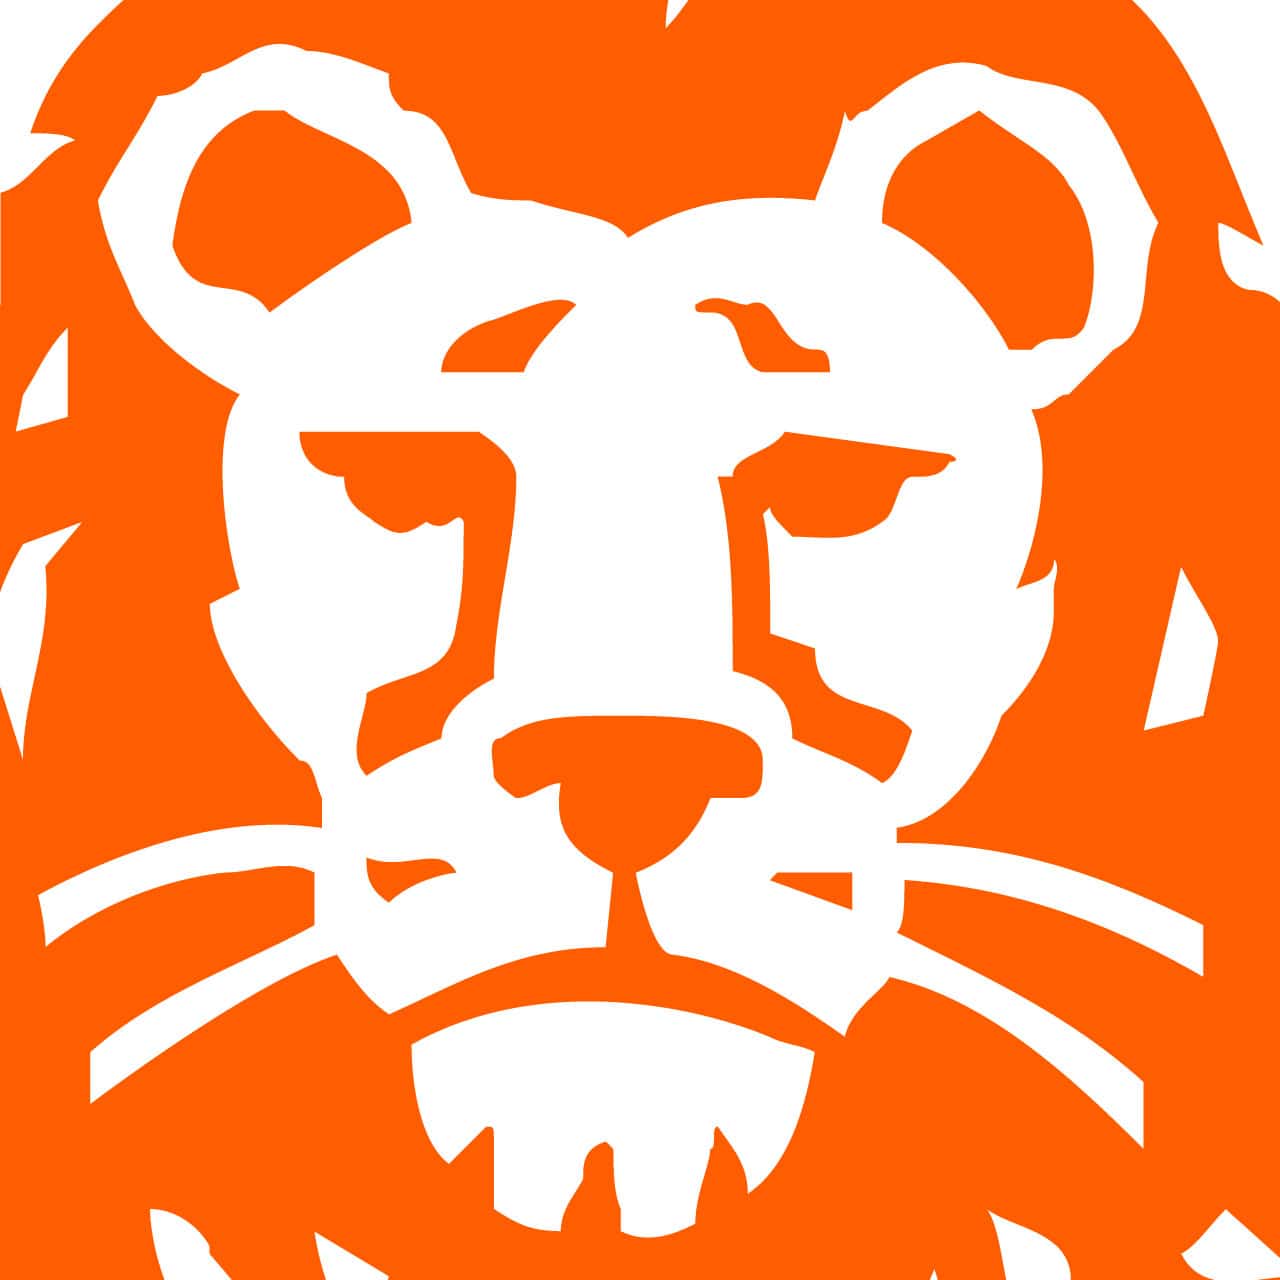 ING Lion Logo - List of Synonyms and Antonyms of the Word: ing lion